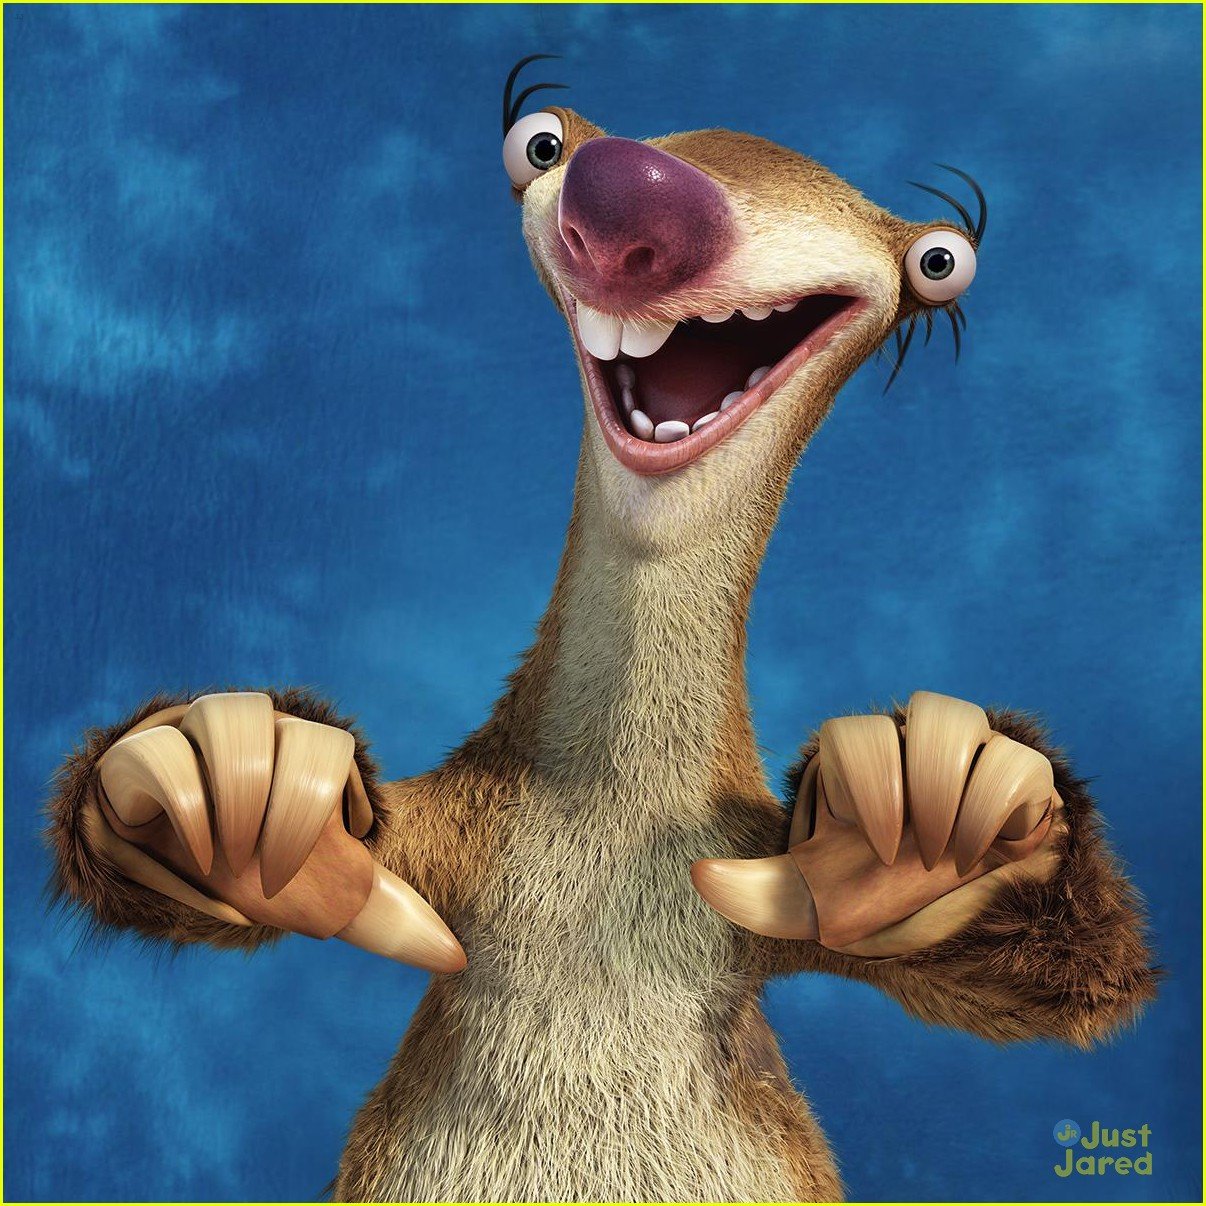 ice age collison course posters new clips watch here 16